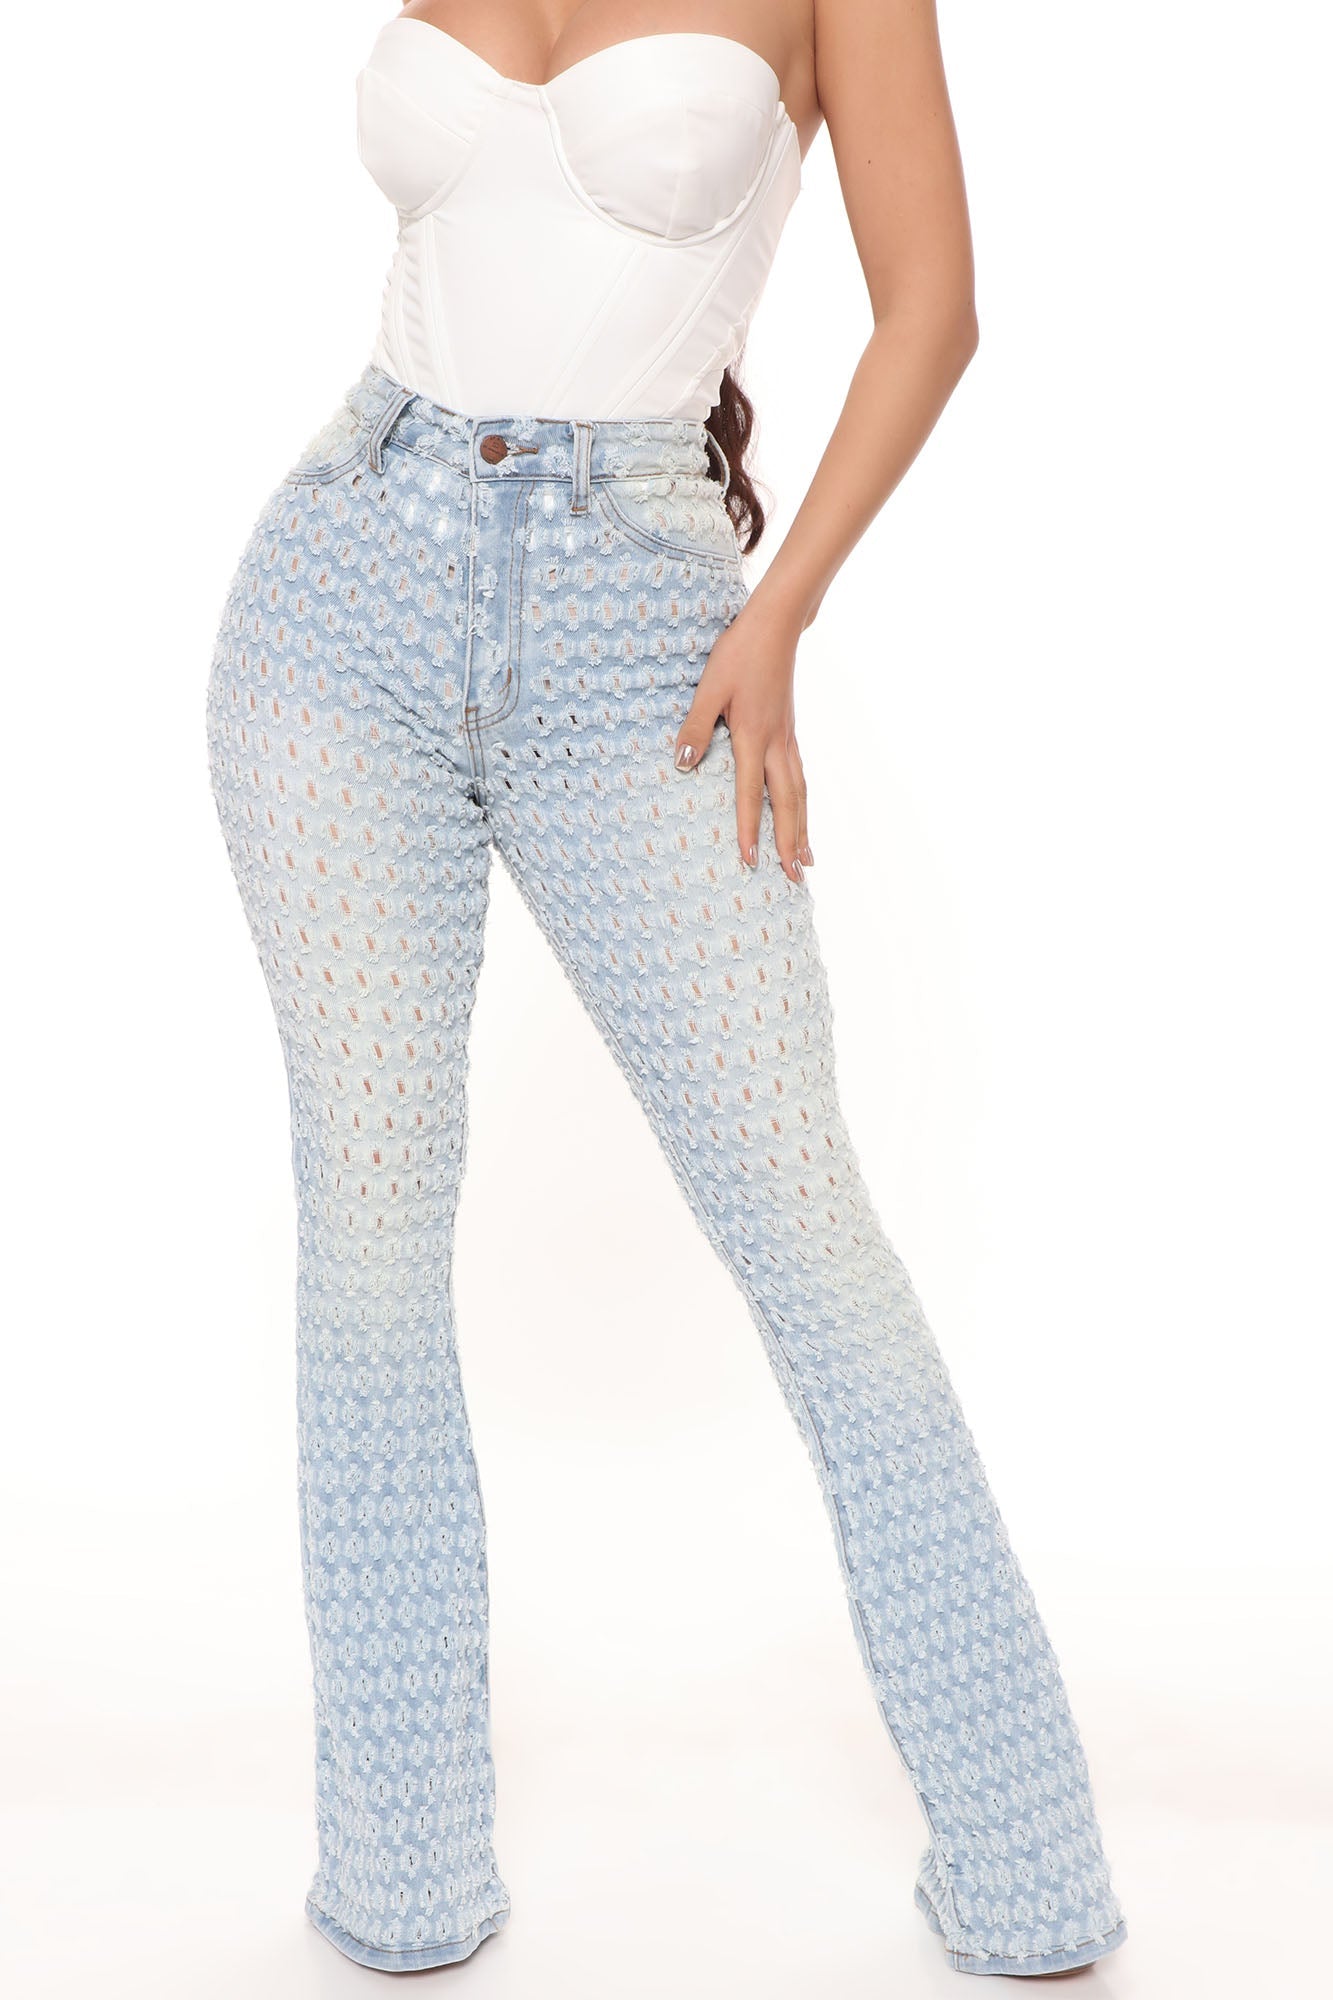 About the Feels Stretch Flare Jeans - Light Blue Wash